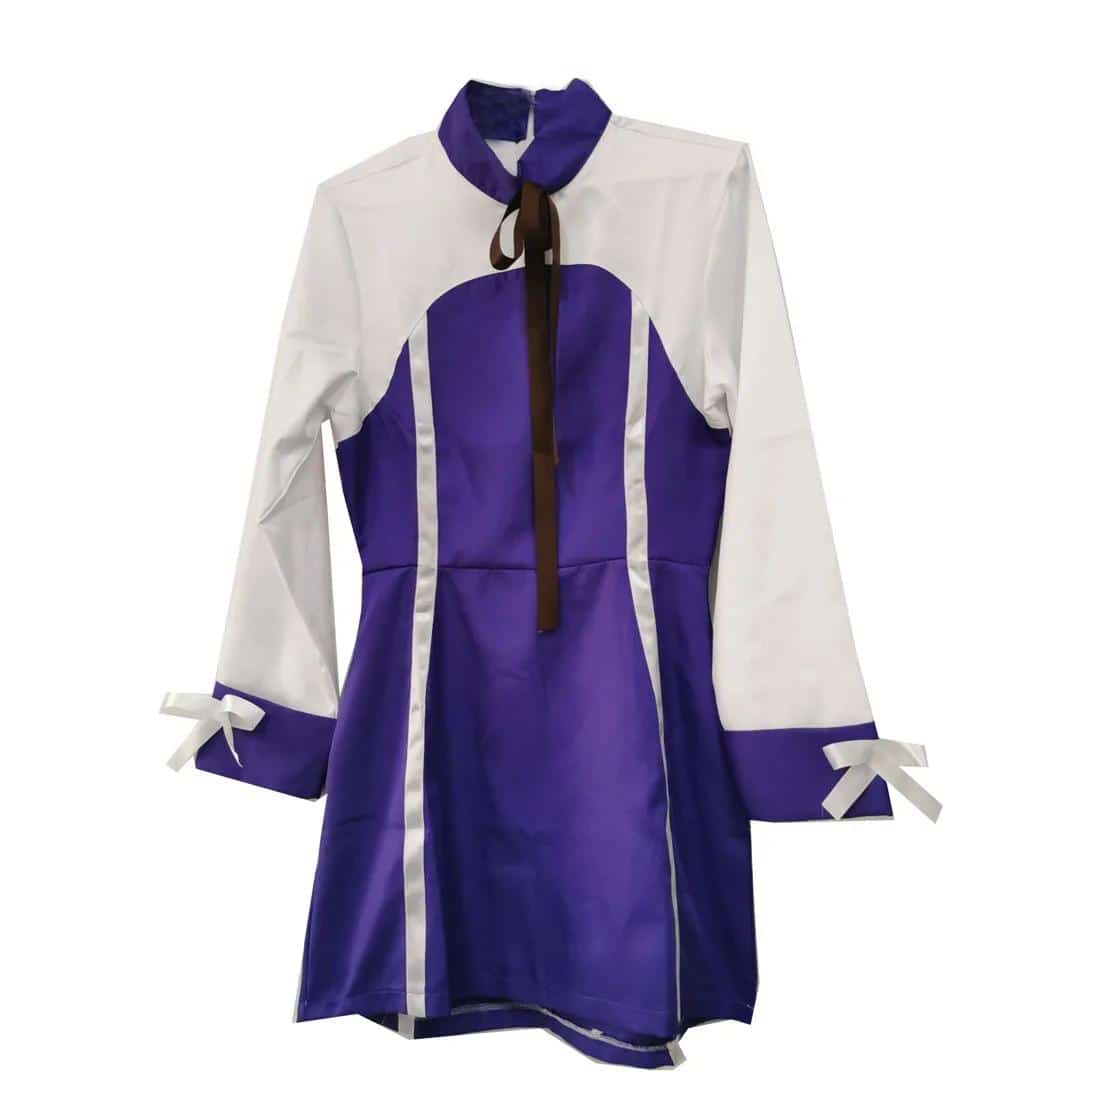 2022 Fairy Tail Wendy Marvell Cosplay Costum 1